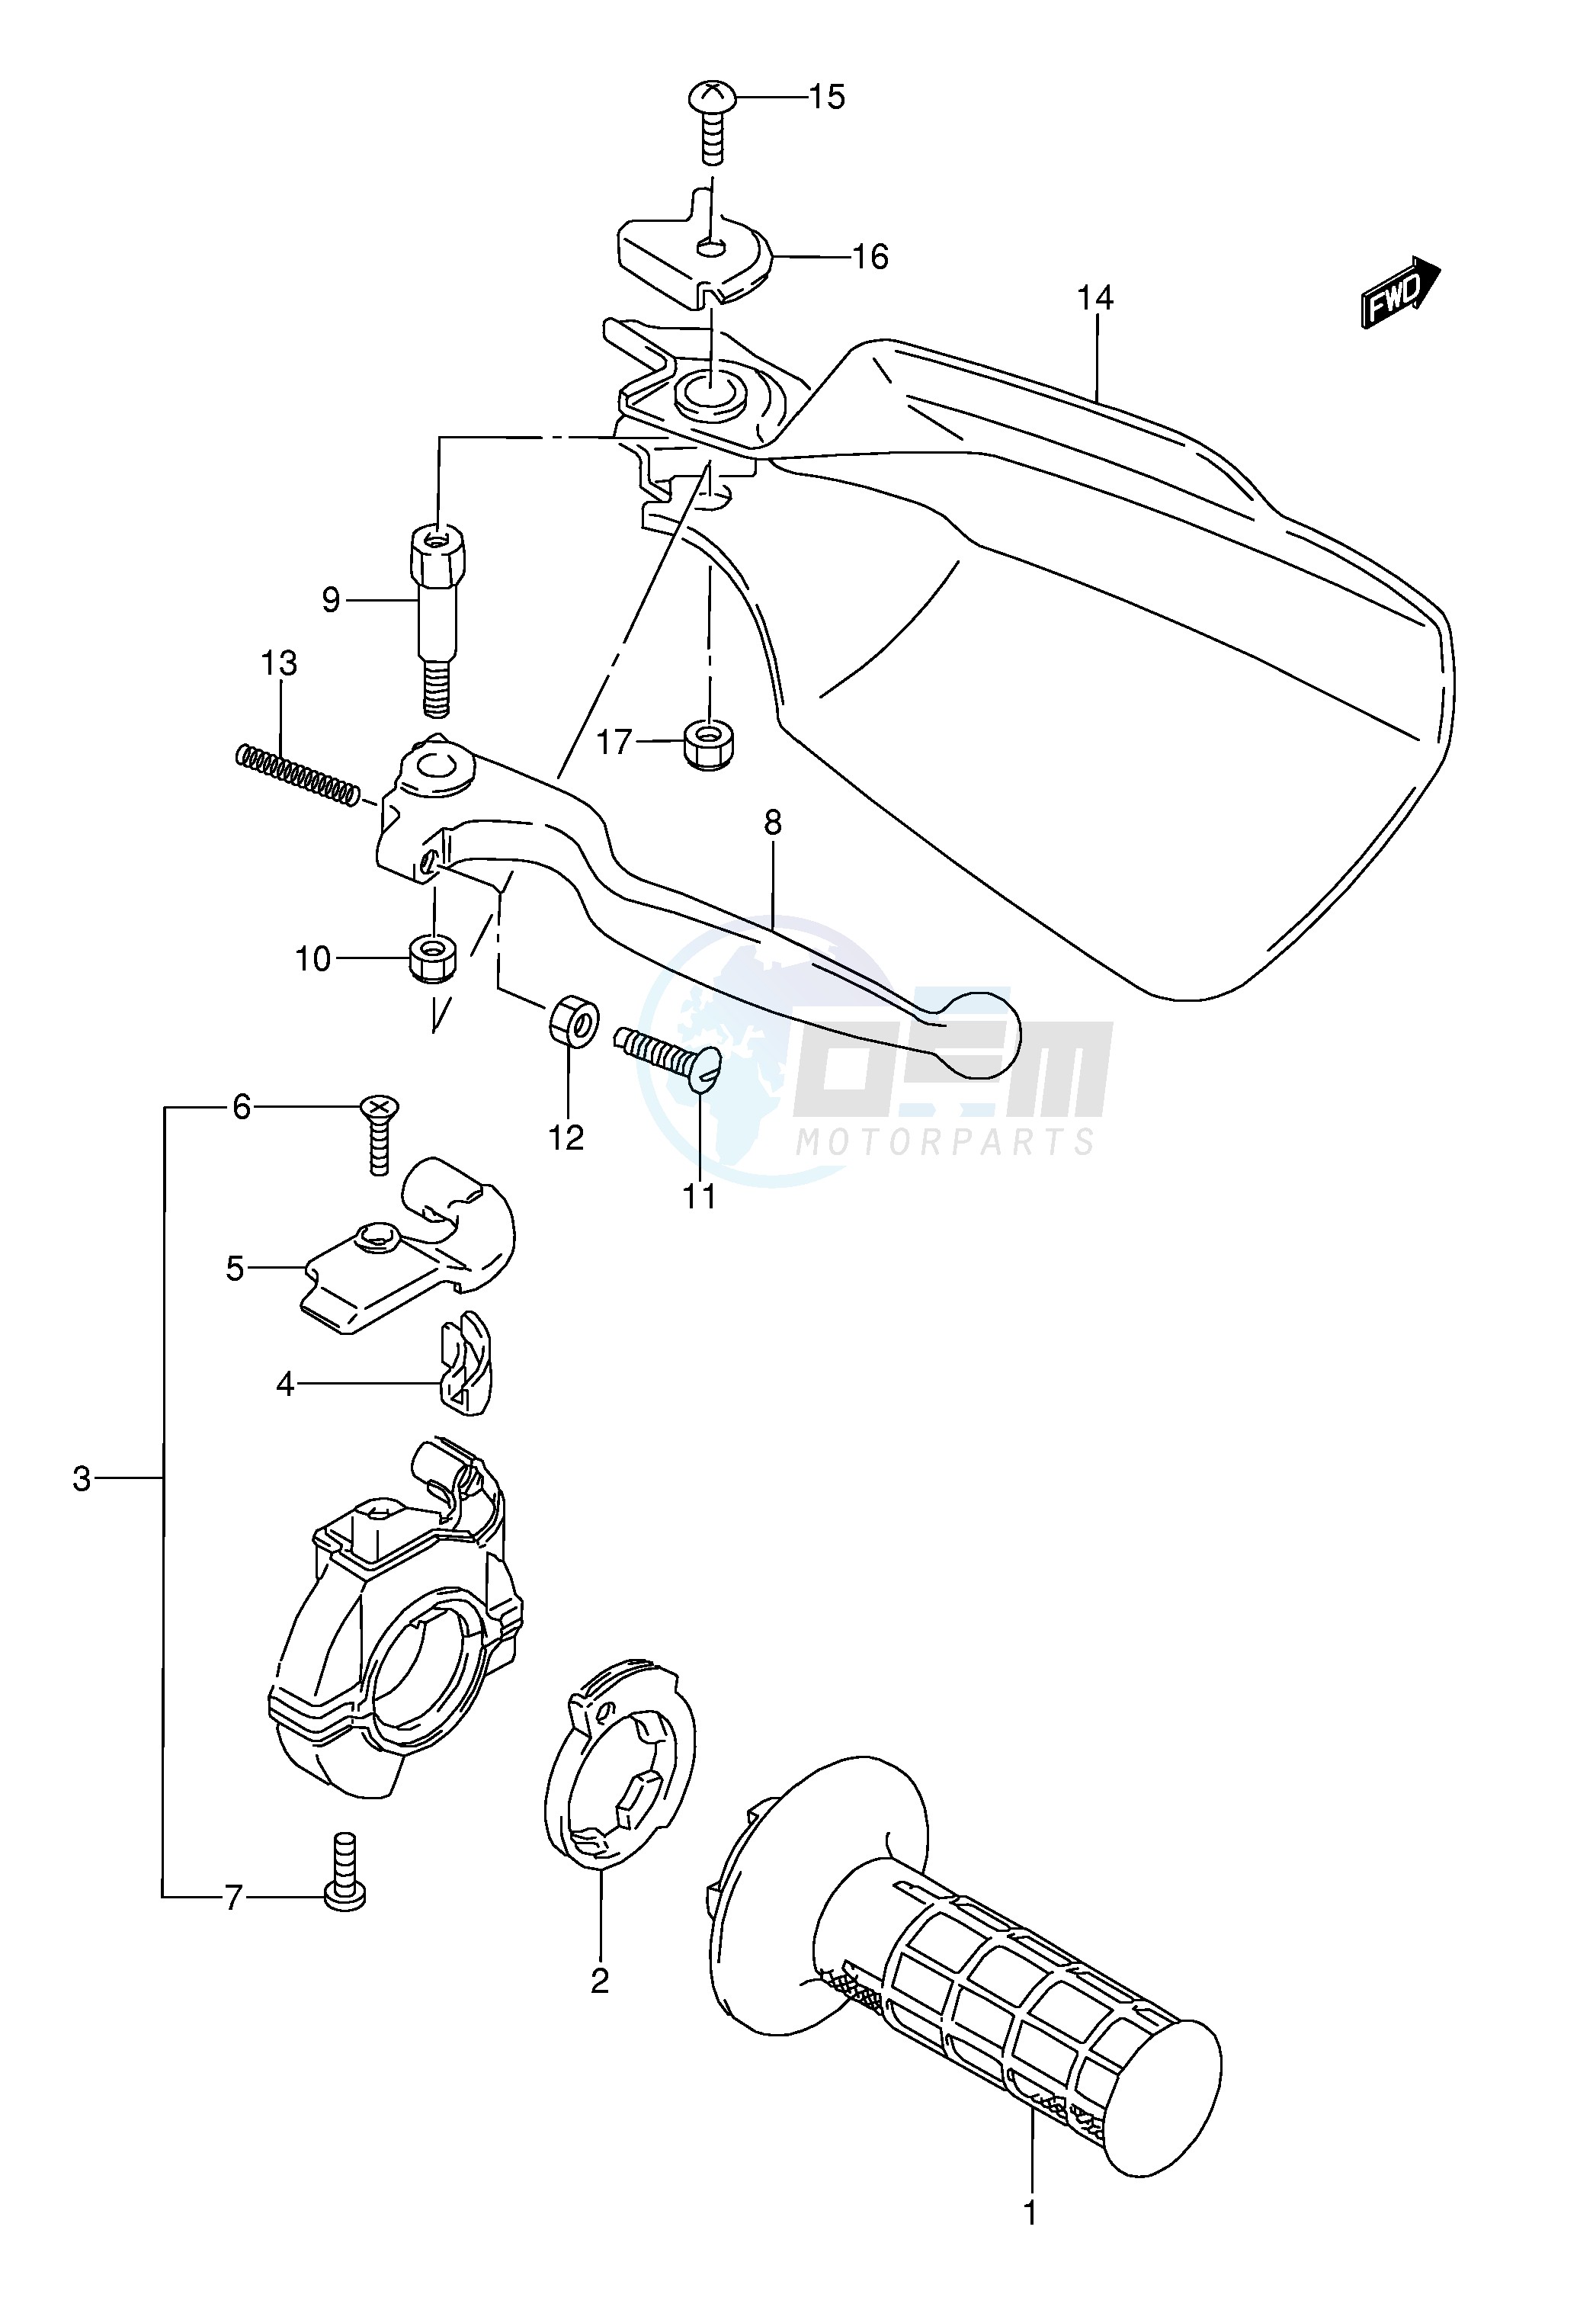 RIGHT KNUCKLE COVER (MODEL N S T) blueprint